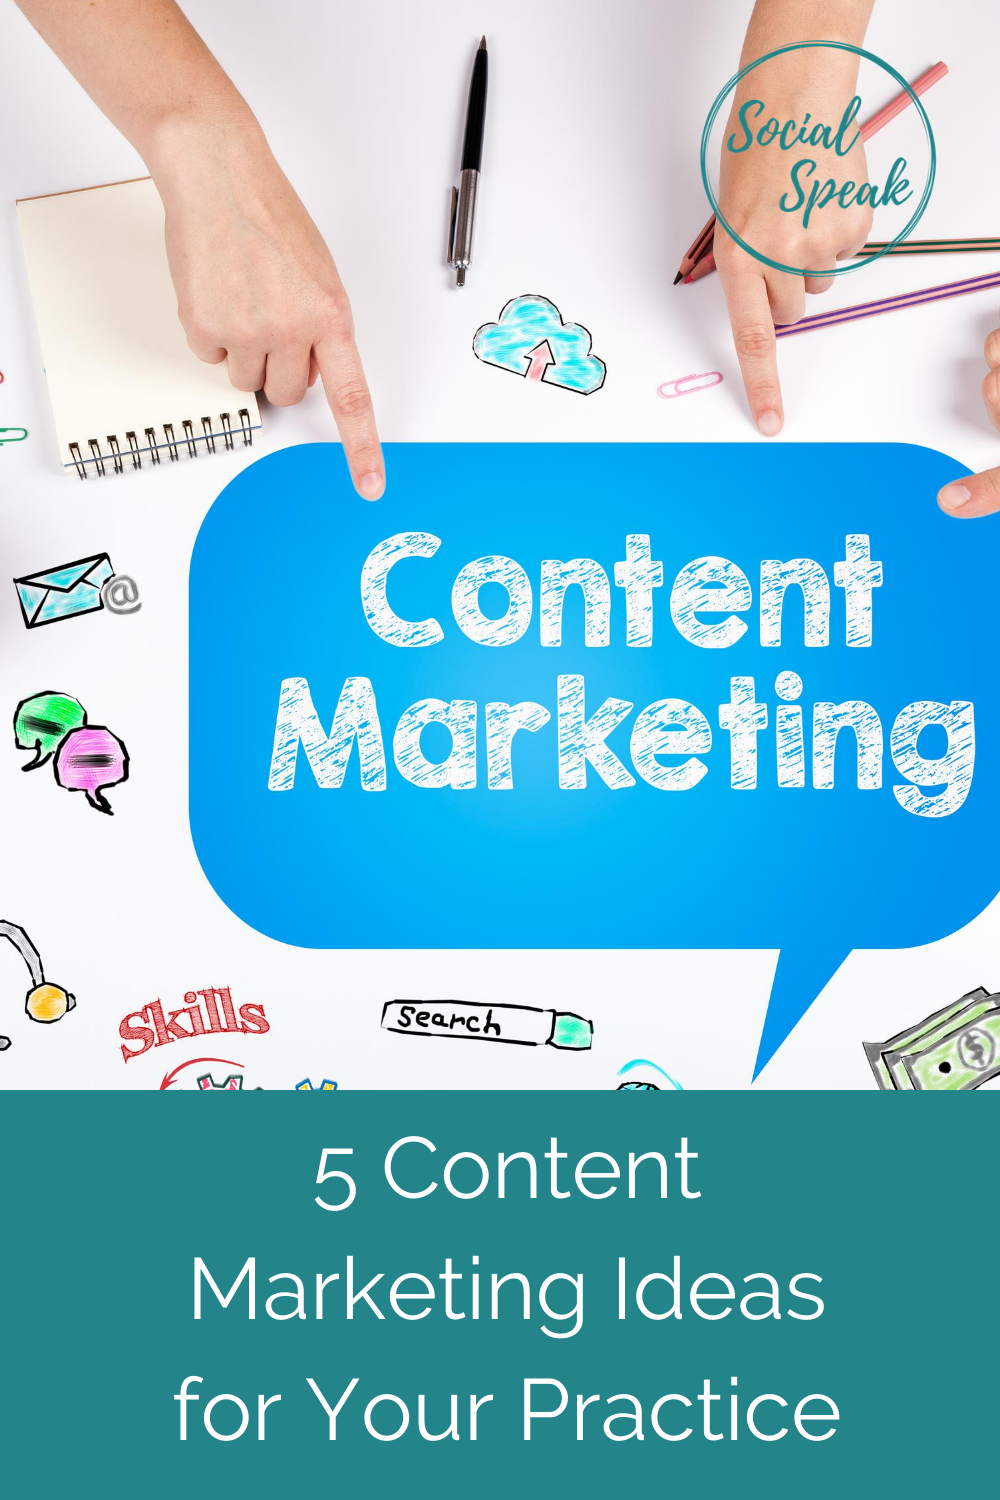 5 Content Marketing Ideas for Your Practice